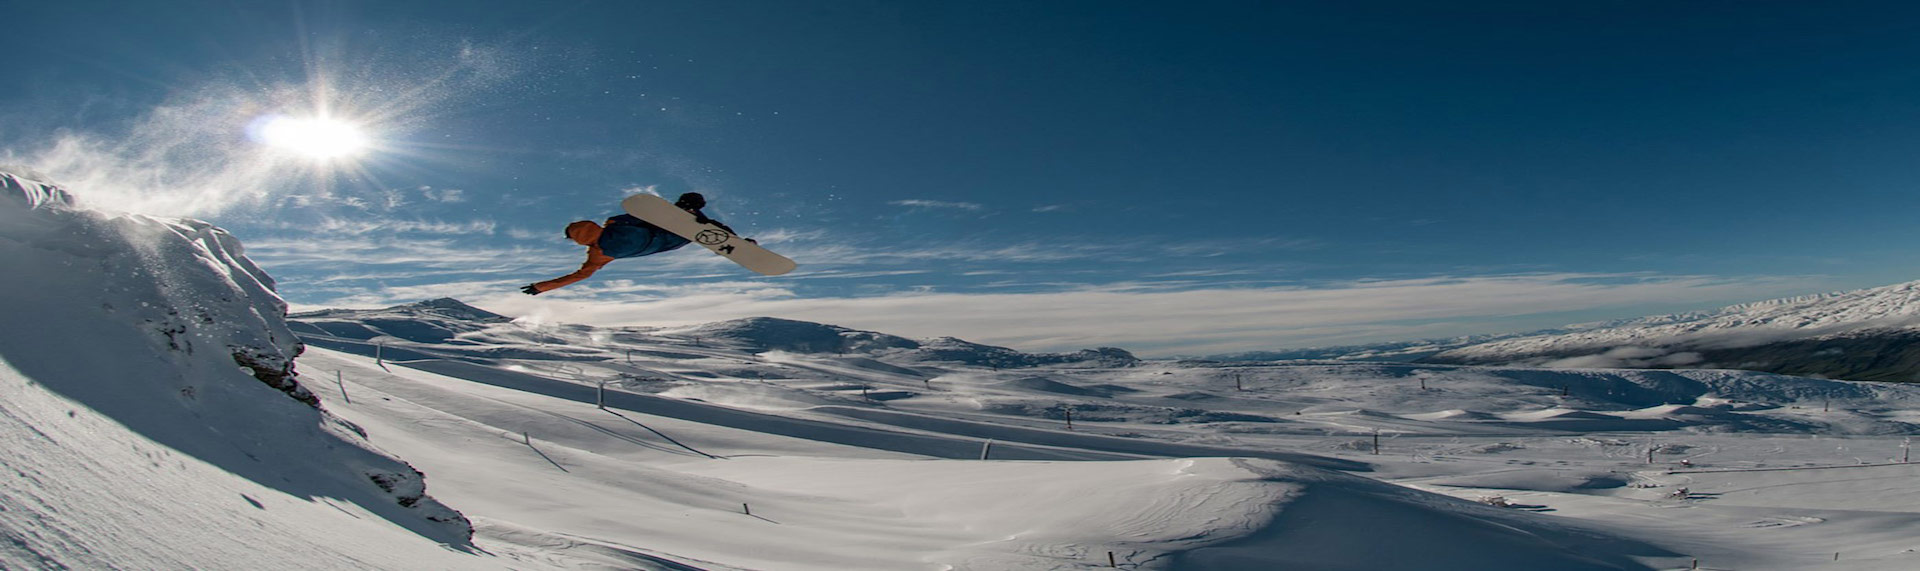 Snowboarder enjoying slopes by mid air jump on with sun in background